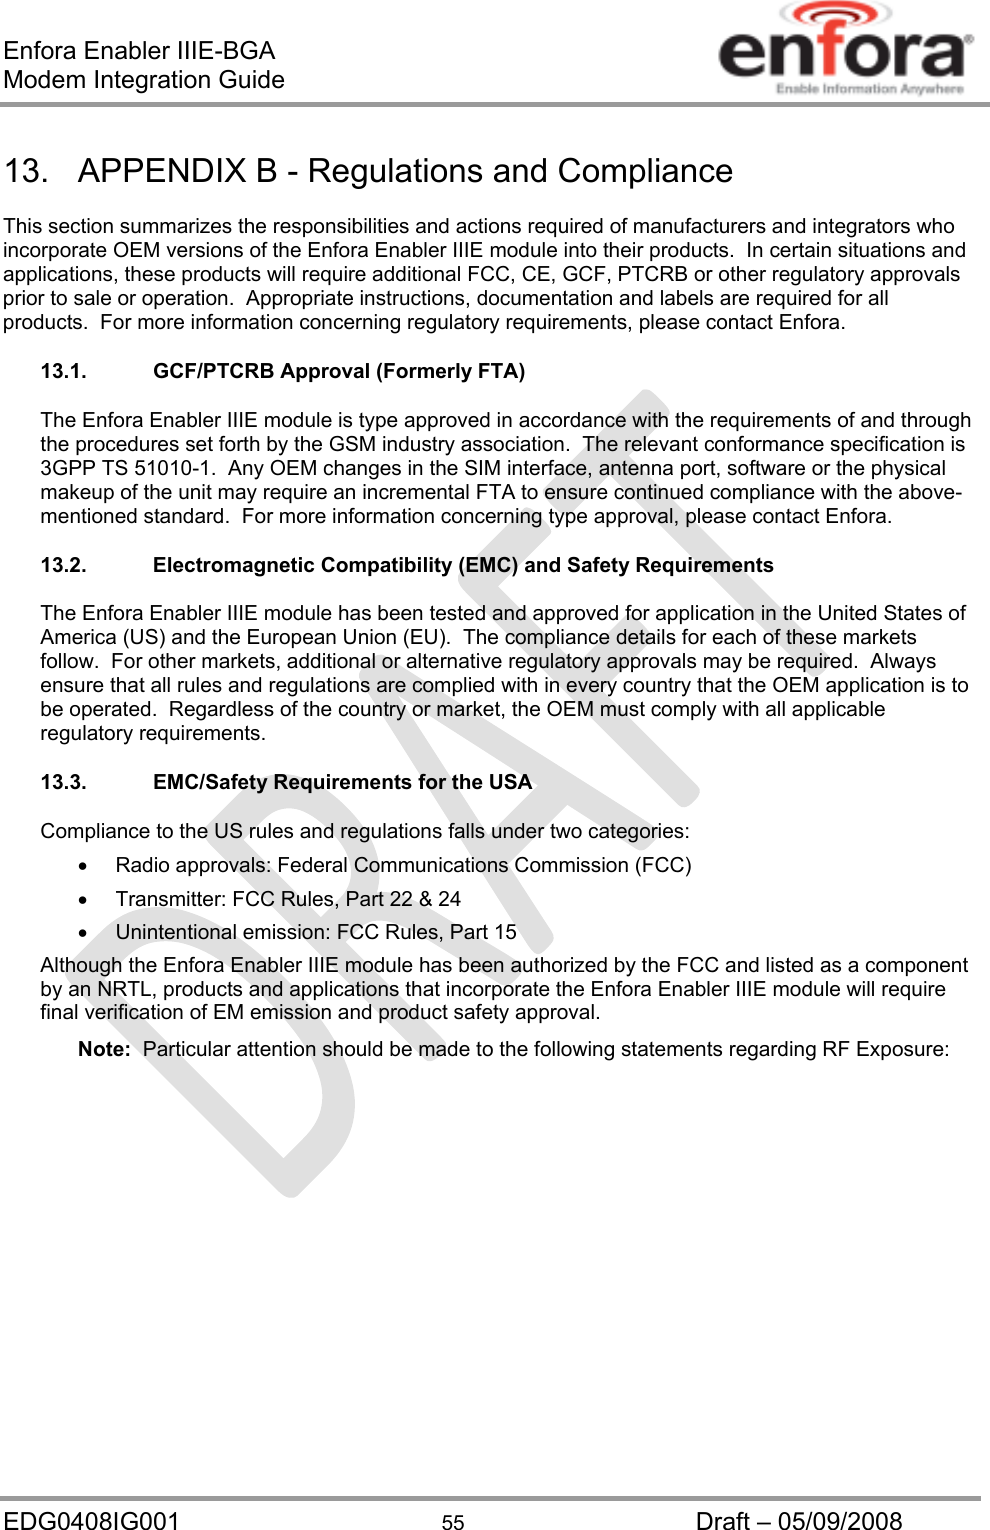 Enfora Enabler IIIE-BGA Modem Integration Guide EDG0408IG001  55  Draft – 05/09/2008 13.  APPENDIX B - Regulations and Compliance This section summarizes the responsibilities and actions required of manufacturers and integrators who incorporate OEM versions of the Enfora Enabler IIIE module into their products.  In certain situations and applications, these products will require additional FCC, CE, GCF, PTCRB or other regulatory approvals prior to sale or operation.  Appropriate instructions, documentation and labels are required for all products.  For more information concerning regulatory requirements, please contact Enfora. 13.1.  GCF/PTCRB Approval (Formerly FTA) The Enfora Enabler IIIE module is type approved in accordance with the requirements of and through the procedures set forth by the GSM industry association.  The relevant conformance specification is 3GPP TS 51010-1.  Any OEM changes in the SIM interface, antenna port, software or the physical makeup of the unit may require an incremental FTA to ensure continued compliance with the above-mentioned standard.  For more information concerning type approval, please contact Enfora. 13.2. Electromagnetic Compatibility (EMC) and Safety Requirements The Enfora Enabler IIIE module has been tested and approved for application in the United States of America (US) and the European Union (EU).  The compliance details for each of these markets follow.  For other markets, additional or alternative regulatory approvals may be required.  Always ensure that all rules and regulations are complied with in every country that the OEM application is to be operated.  Regardless of the country or market, the OEM must comply with all applicable regulatory requirements. 13.3.  EMC/Safety Requirements for the USA Compliance to the US rules and regulations falls under two categories:   Radio approvals: Federal Communications Commission (FCC)   Transmitter: FCC Rules, Part 22 &amp; 24   Unintentional emission: FCC Rules, Part 15 Although the Enfora Enabler IIIE module has been authorized by the FCC and listed as a component by an NRTL, products and applications that incorporate the Enfora Enabler IIIE module will require final verification of EM emission and product safety approval. Note:  Particular attention should be made to the following statements regarding RF Exposure: 